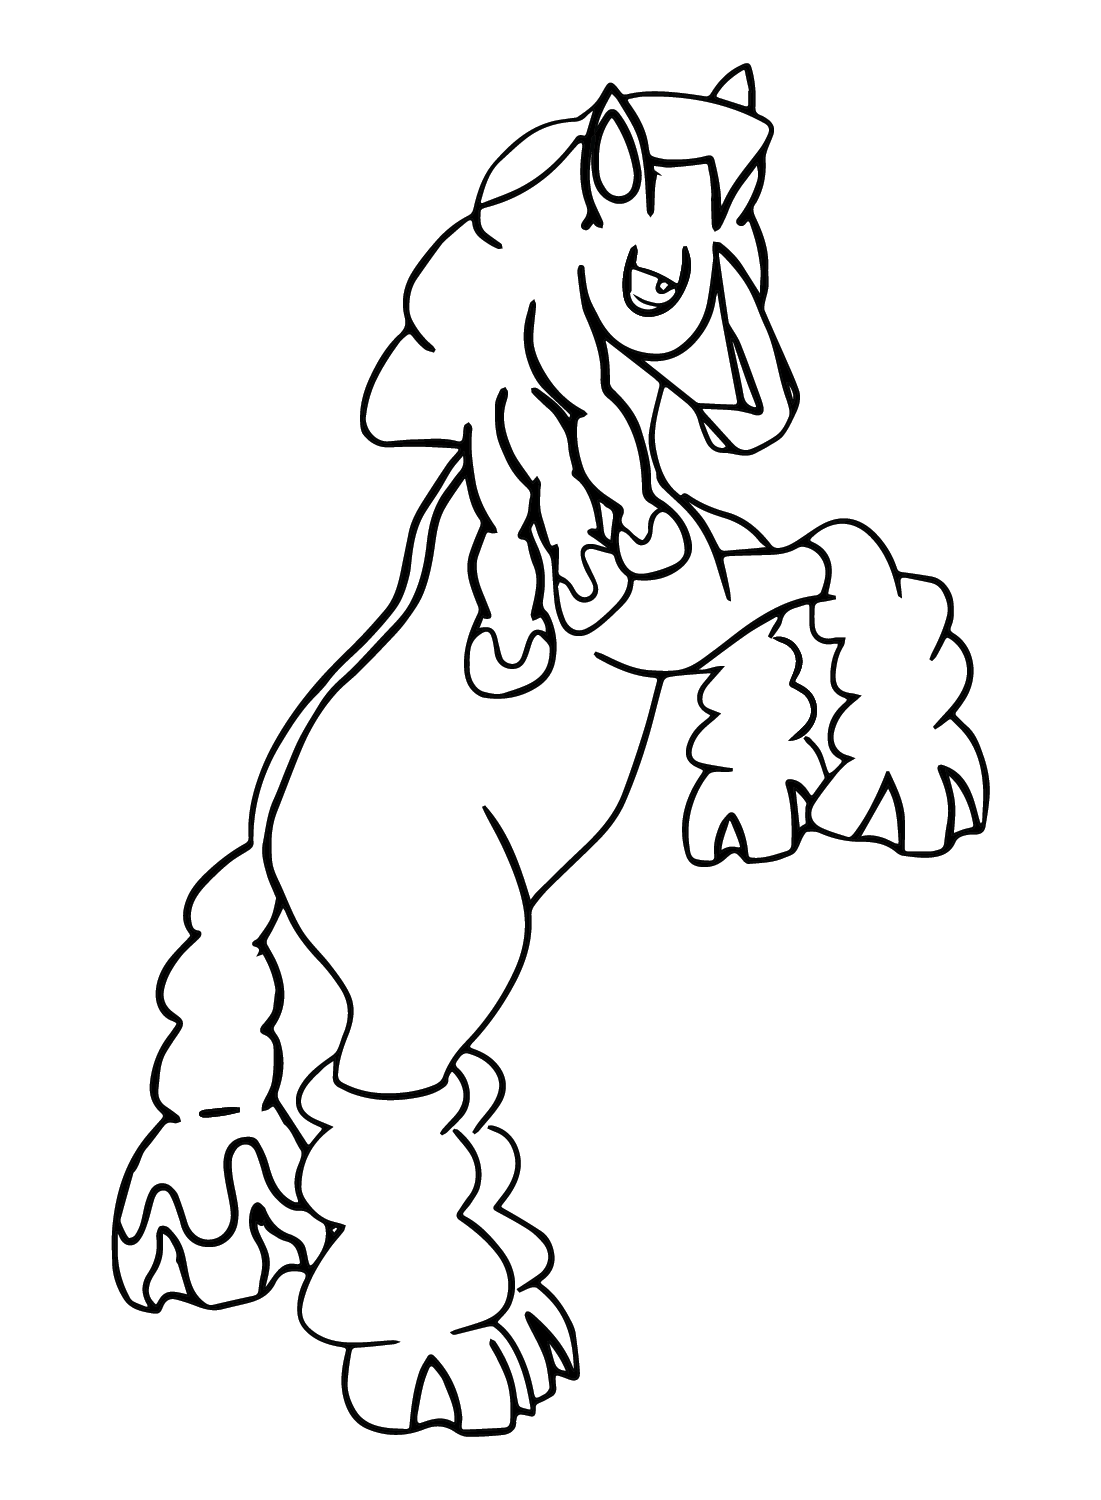 Mudsdale Character Coloring Page